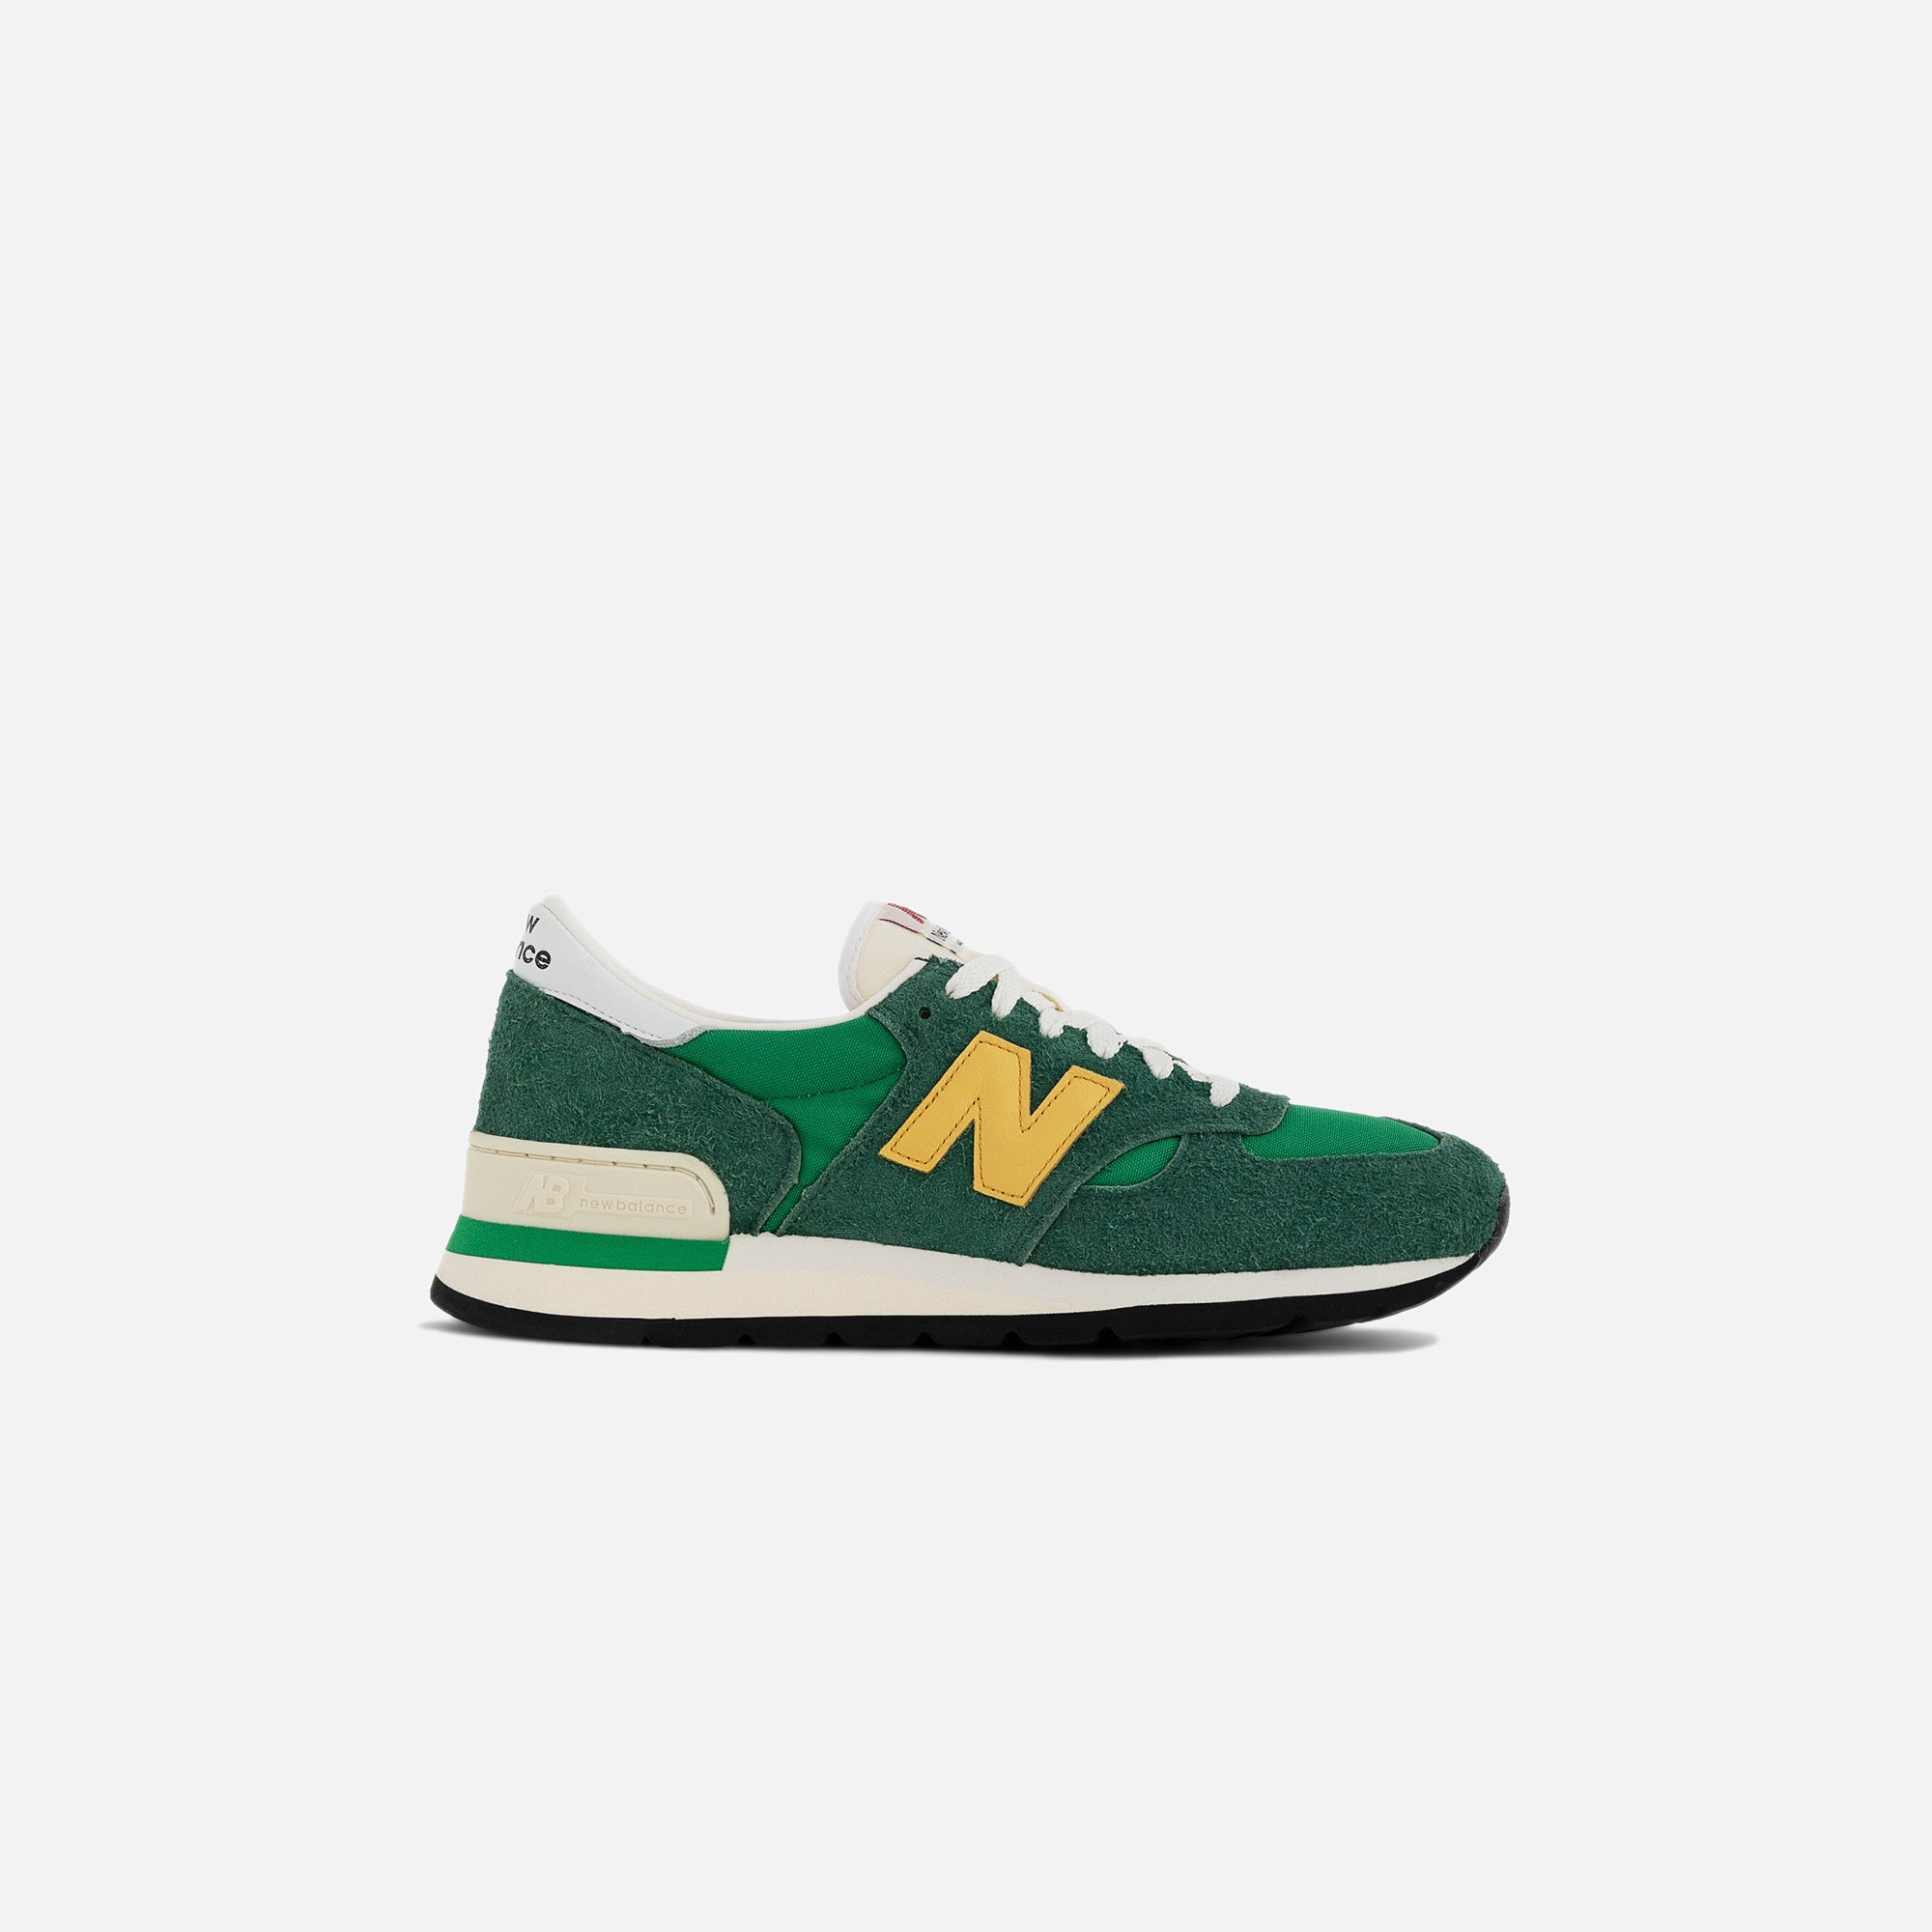 New Balance Made in US 990 V1 - Green / Gold – Kith